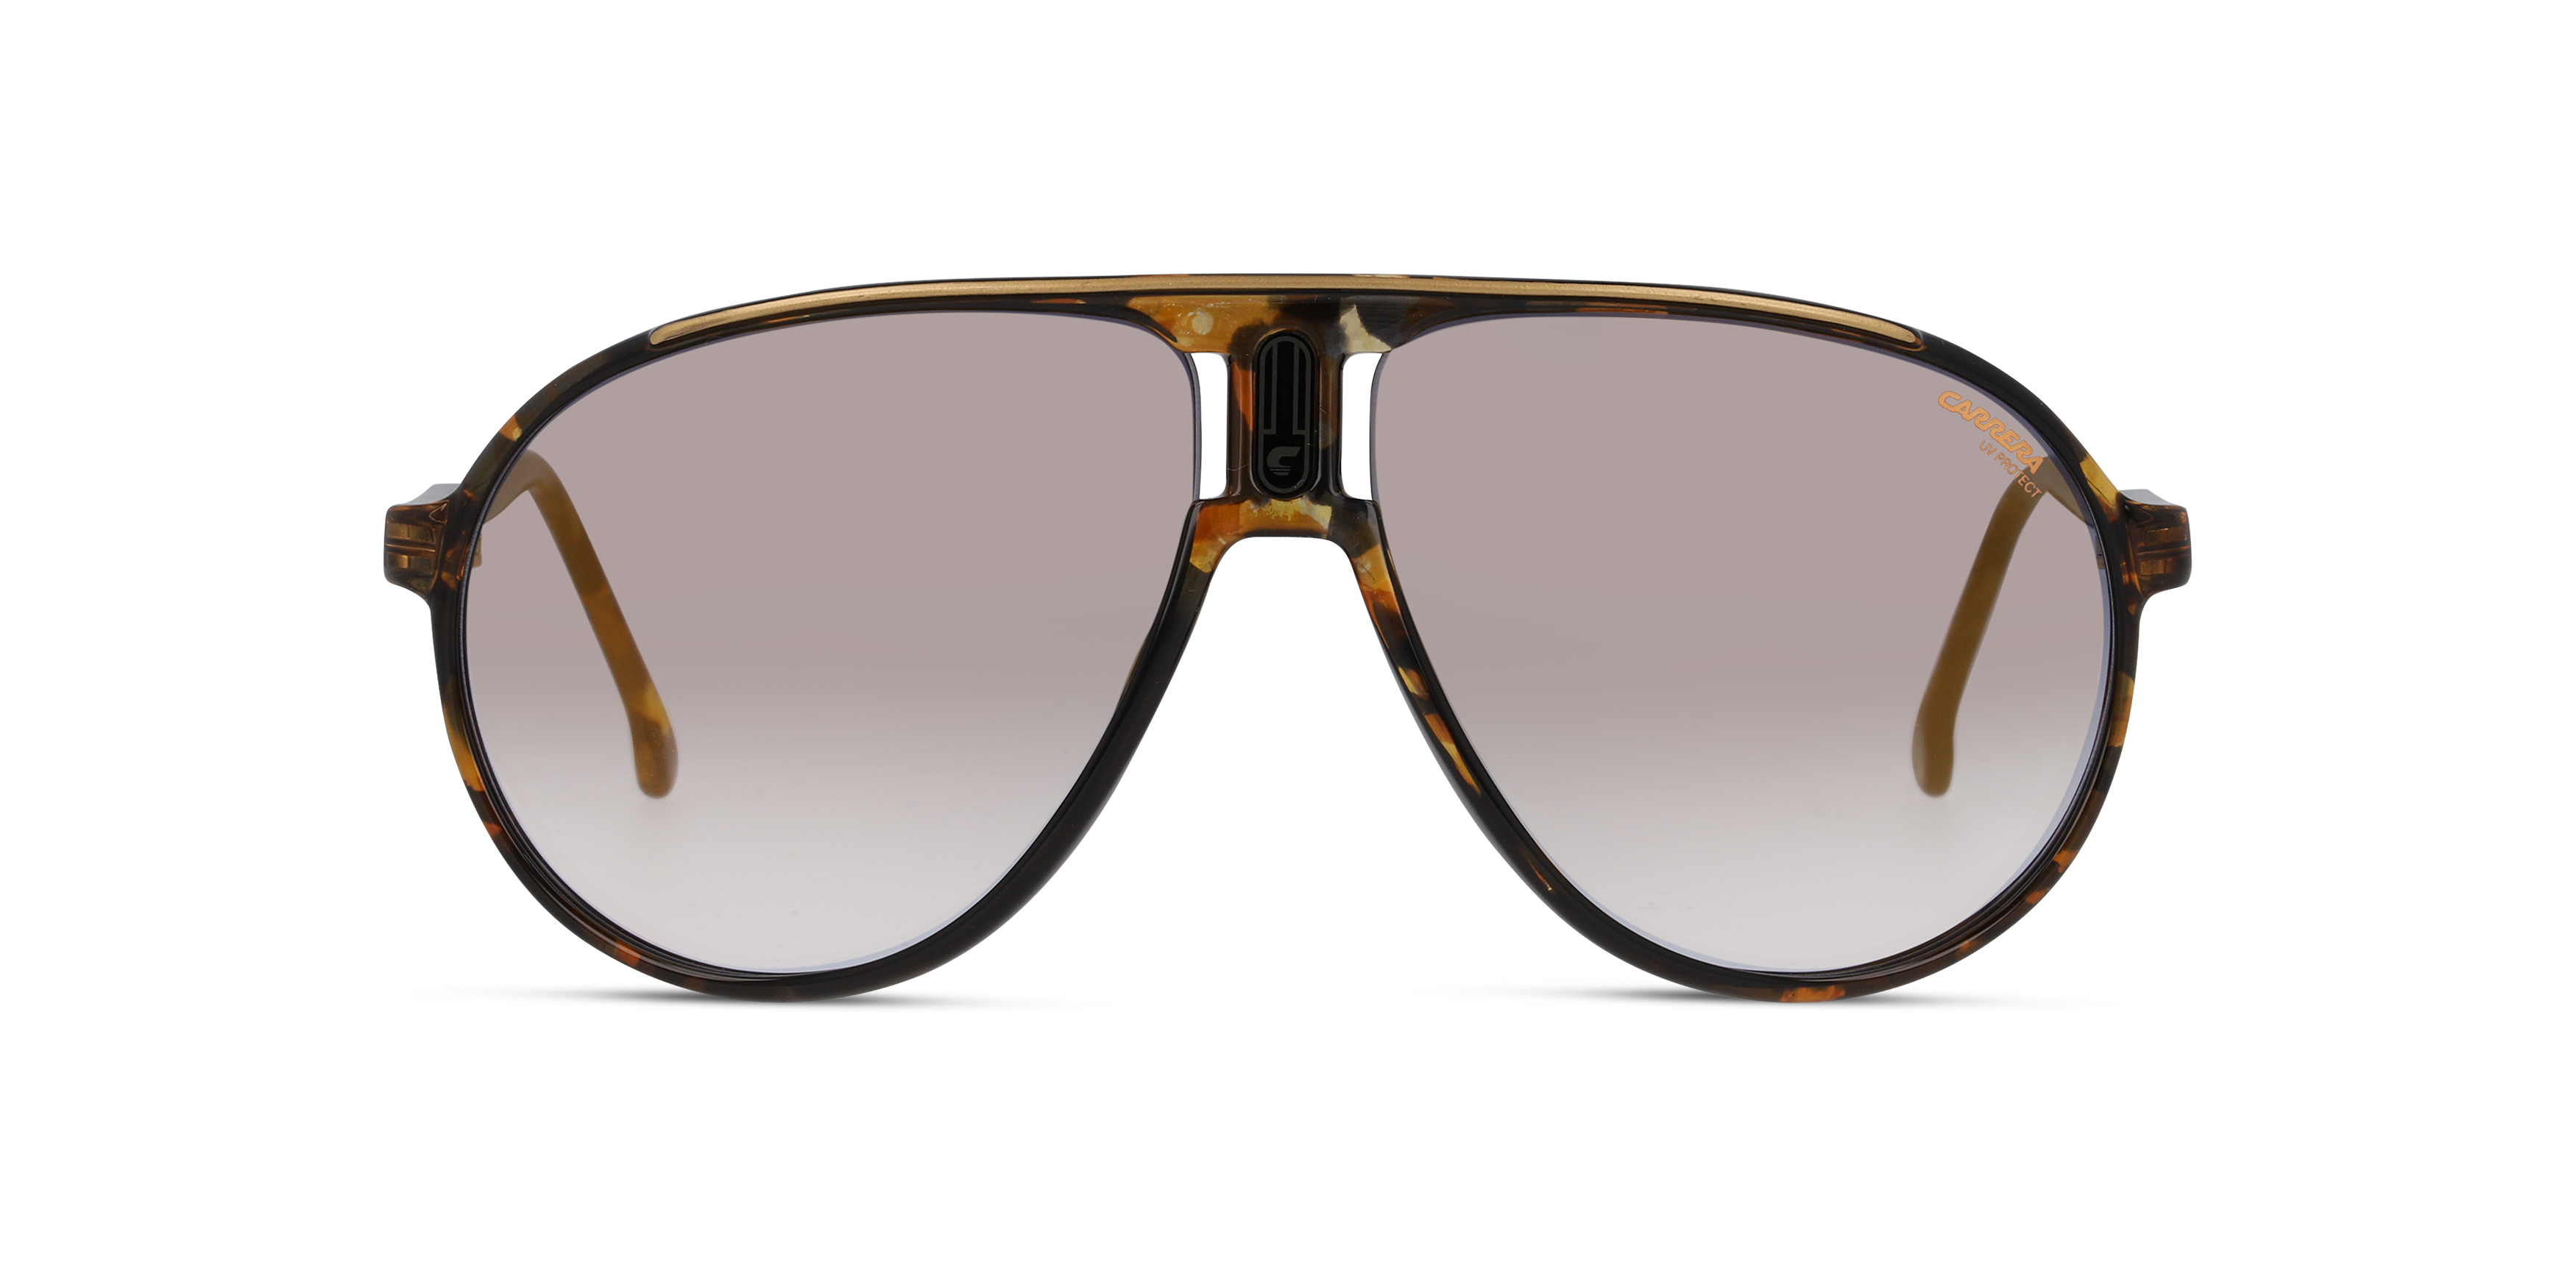 [products.image.front] CARRERA CHAMPION65 WR9